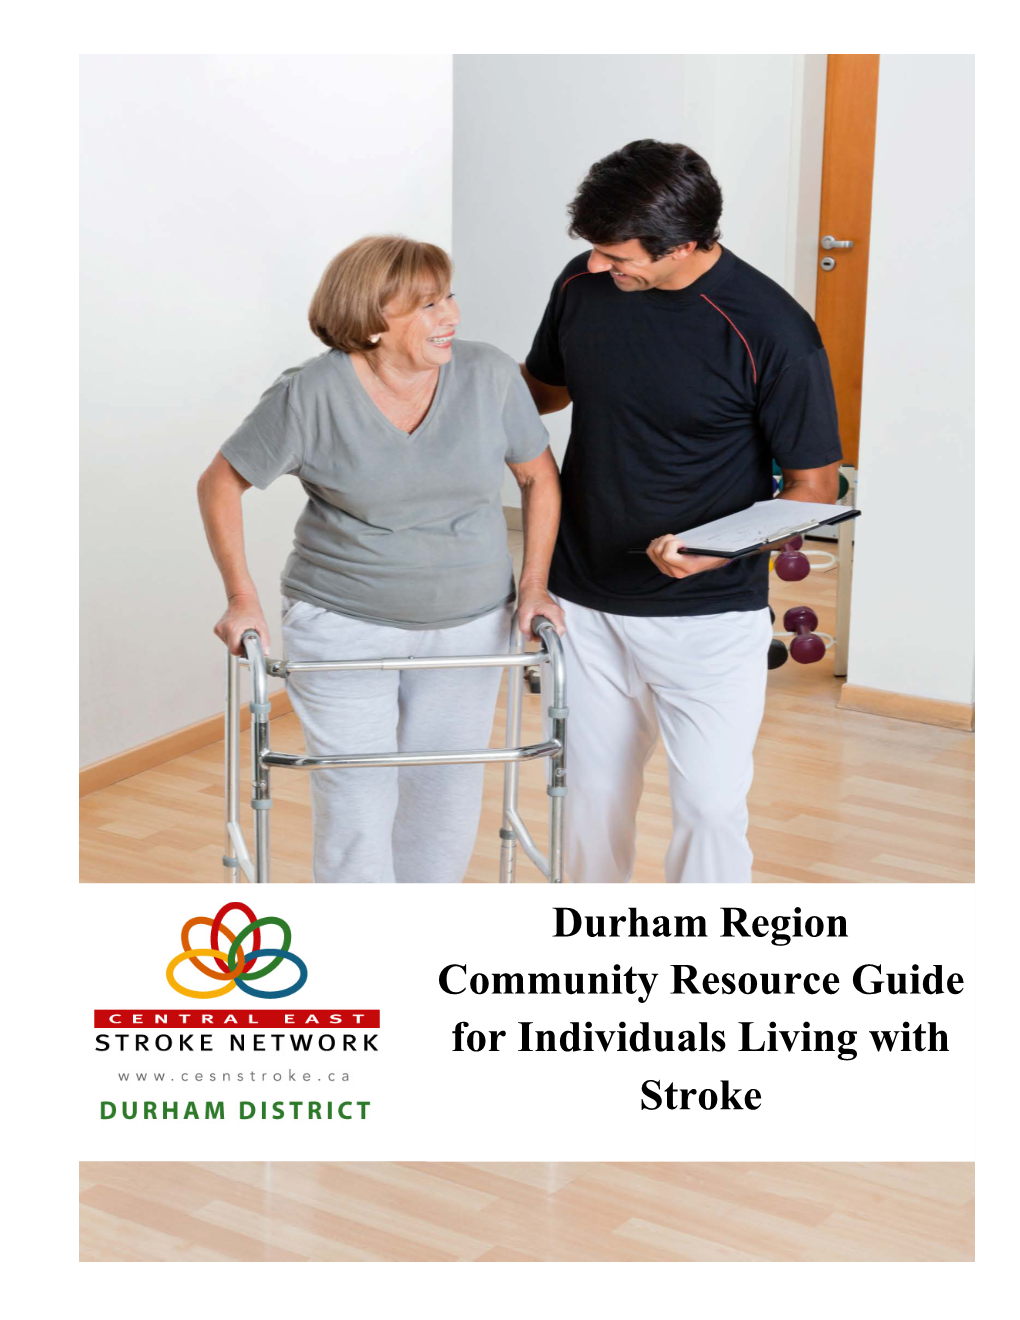 Durham Region Community Resource Guide for Individuals Living with Stroke